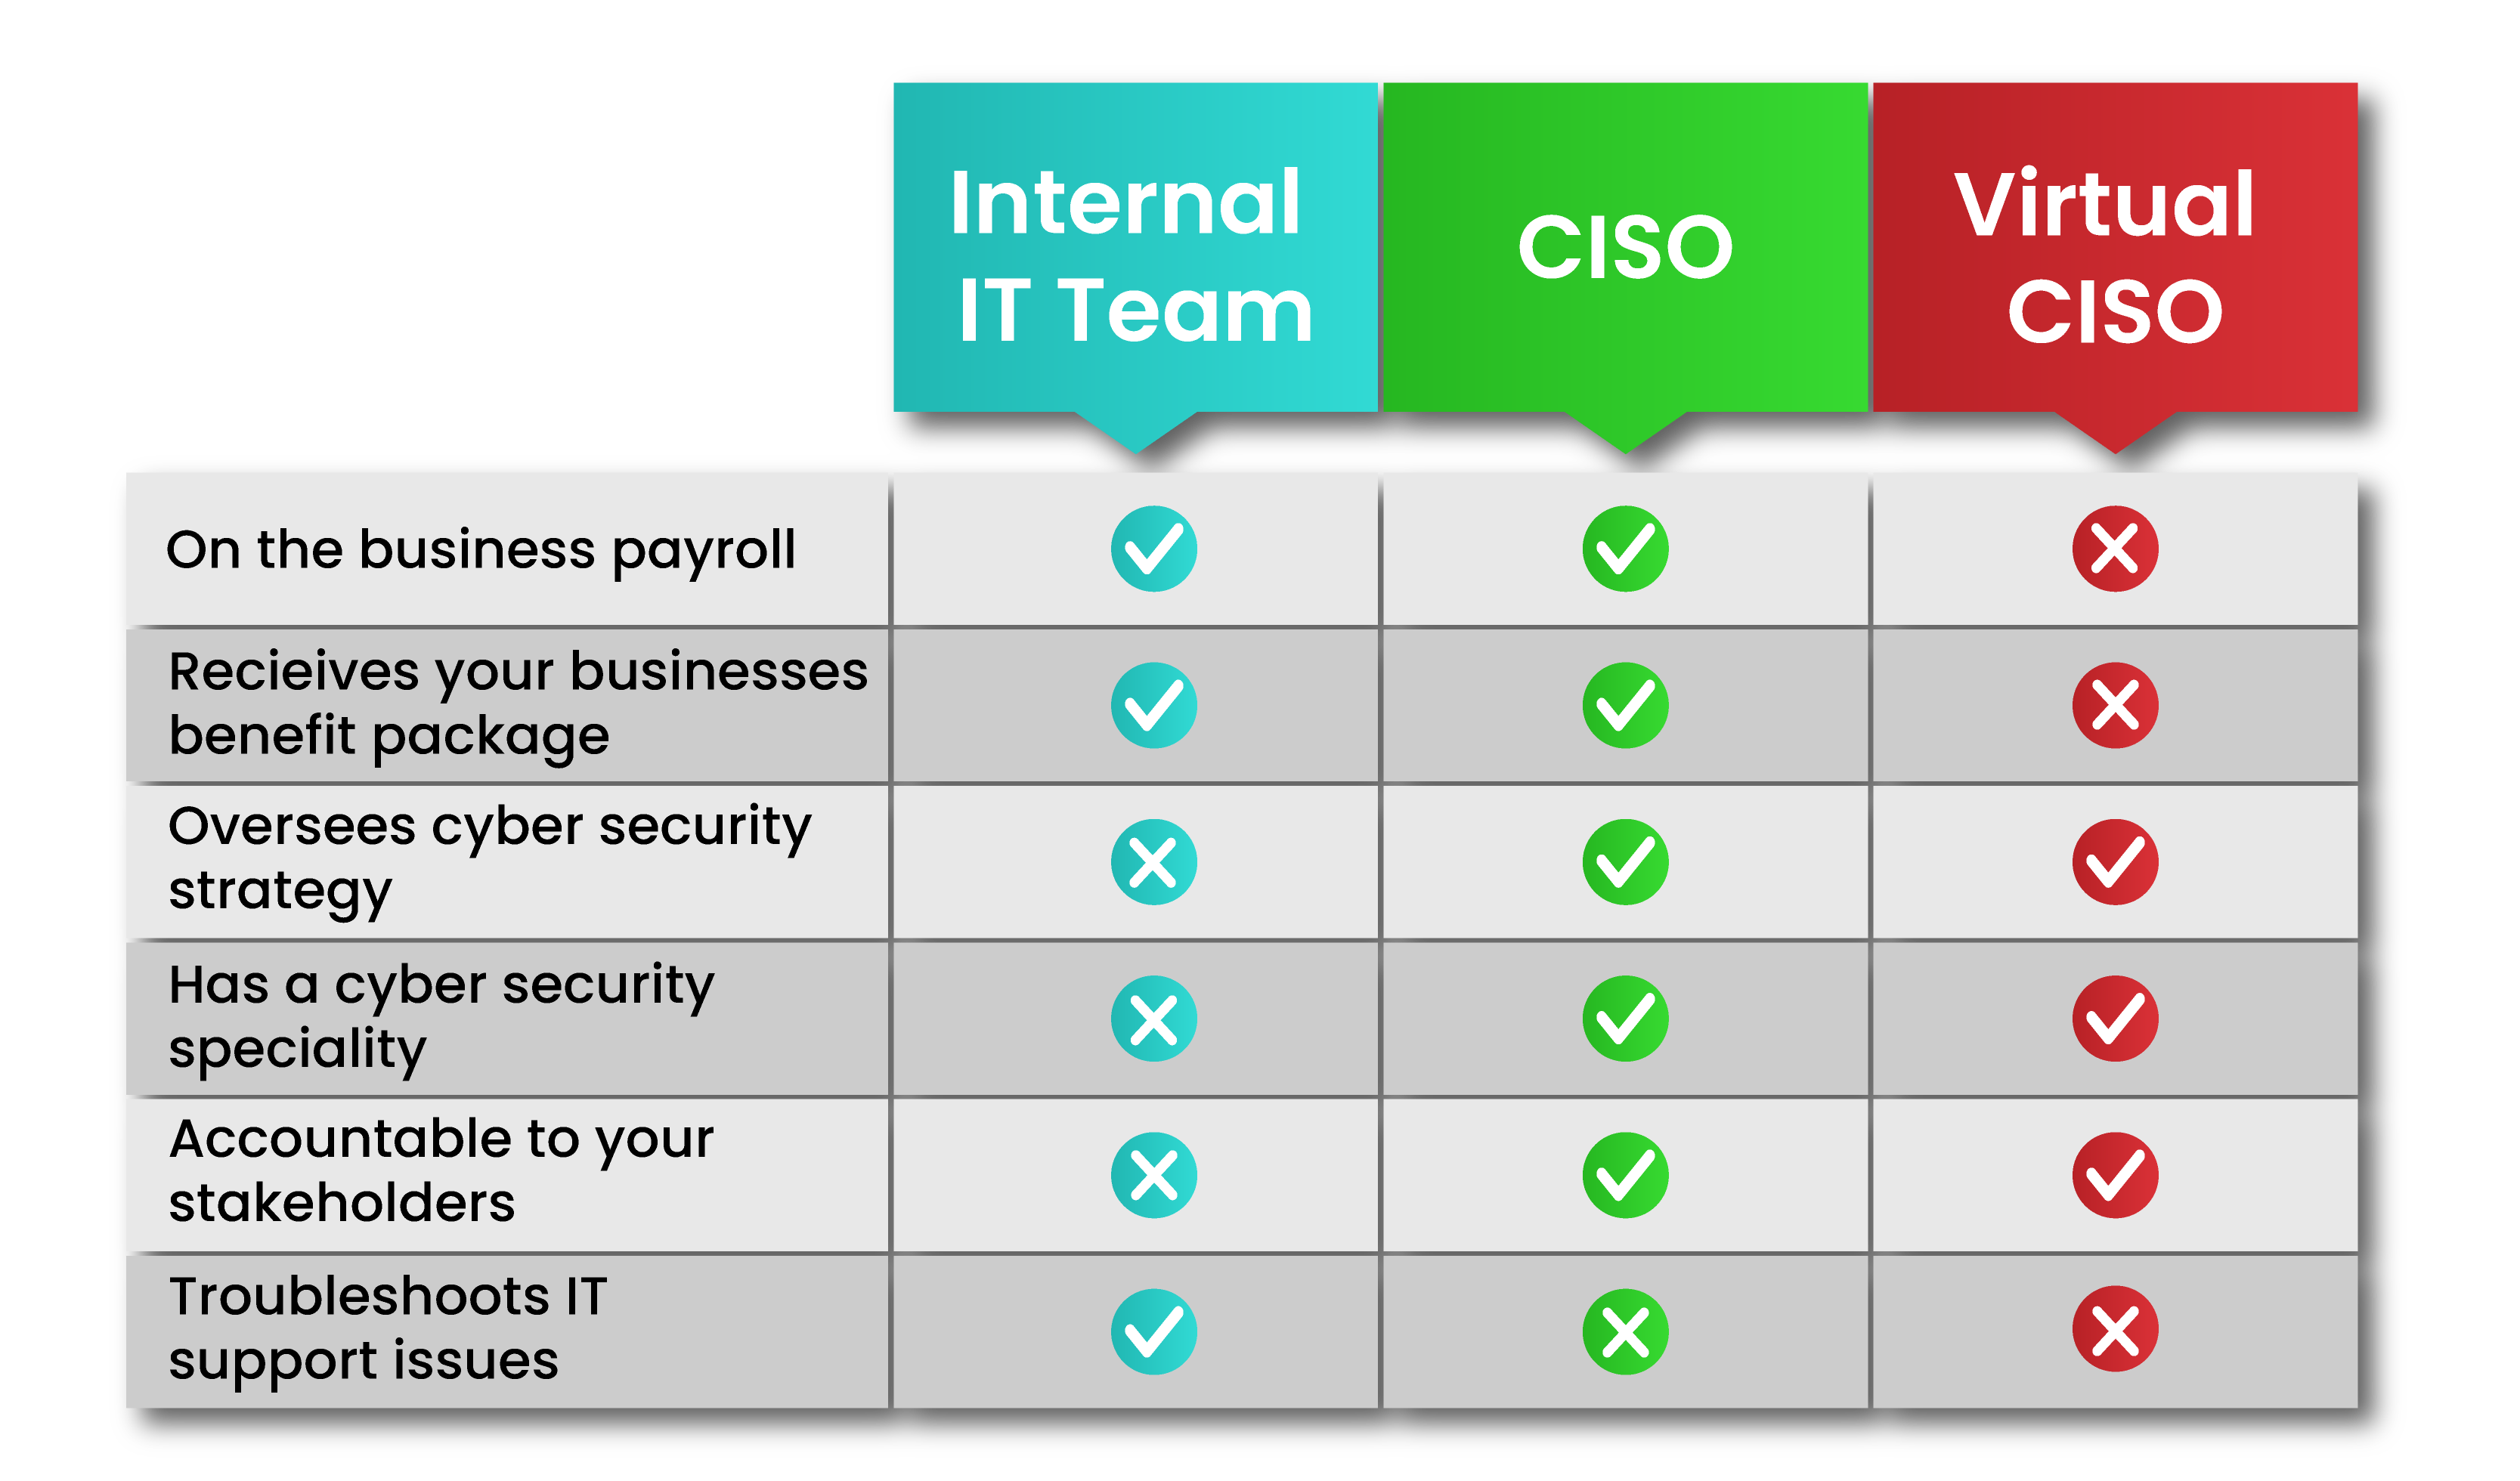 What's the difference between internal IT Teams and Virtual CISO?